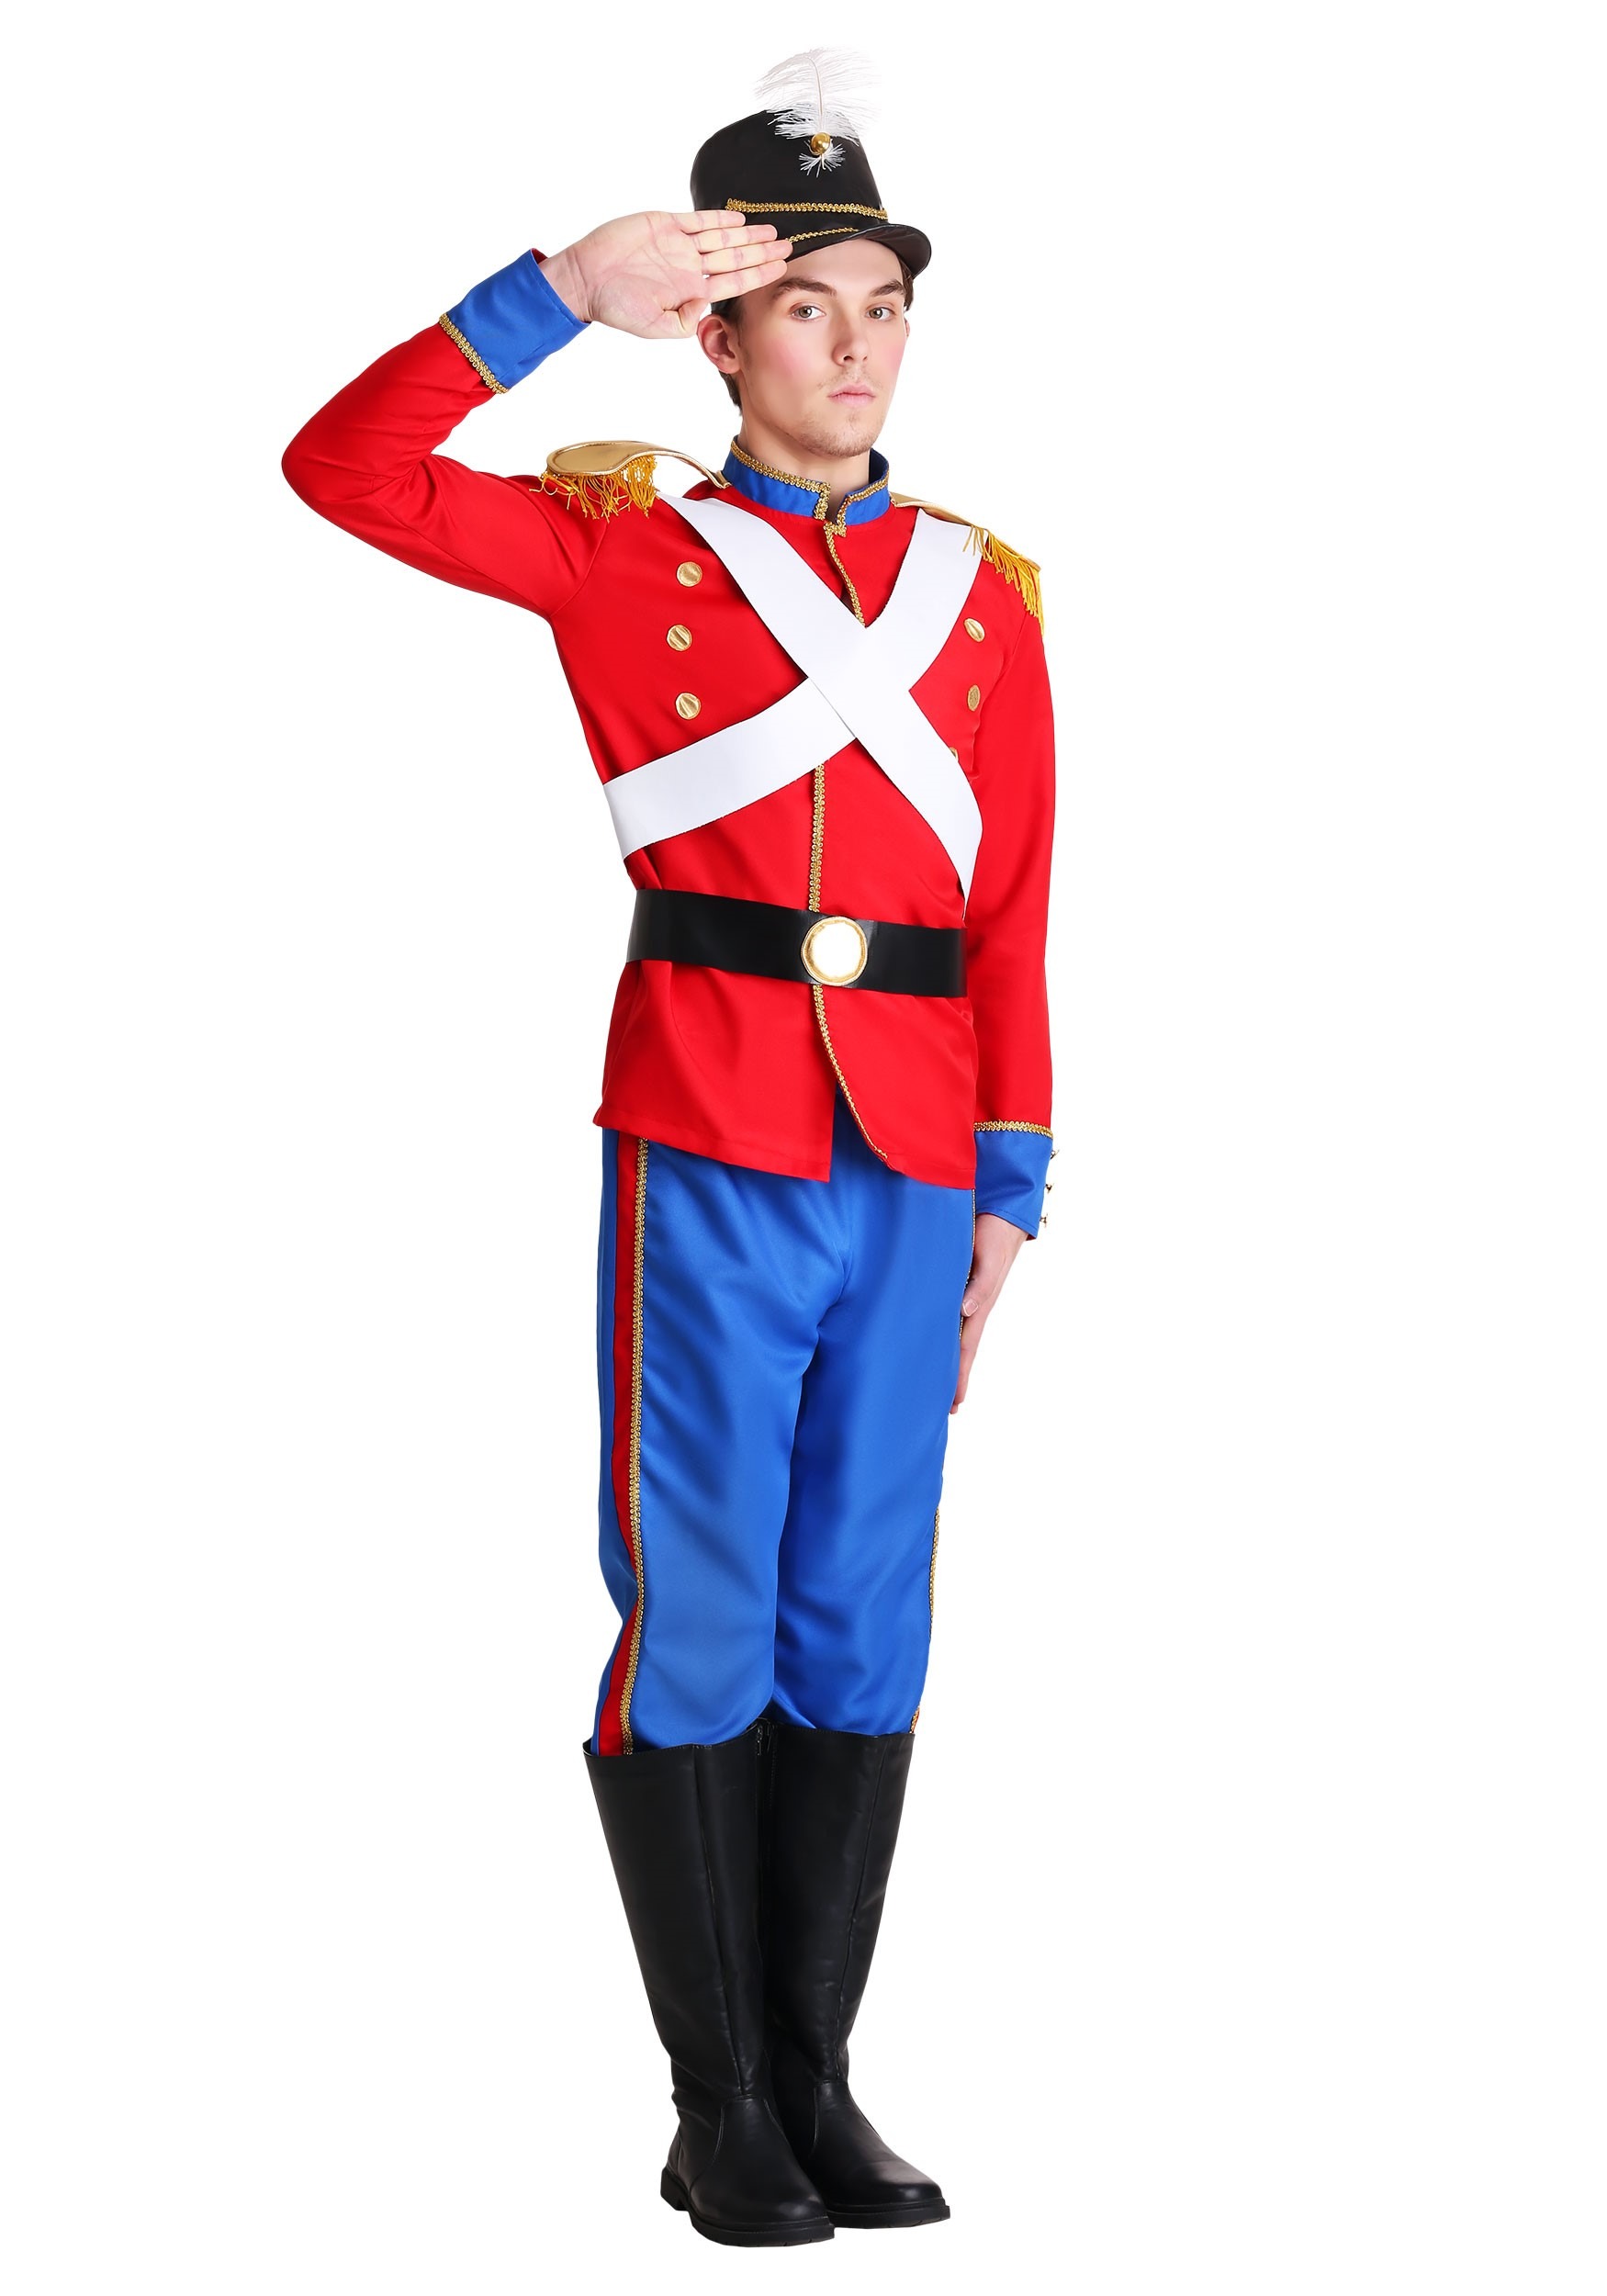 Photos - Fancy Dress Soldier FUN Costumes Men's Toy  Costume Black/Blue/Red FUN0589AD 